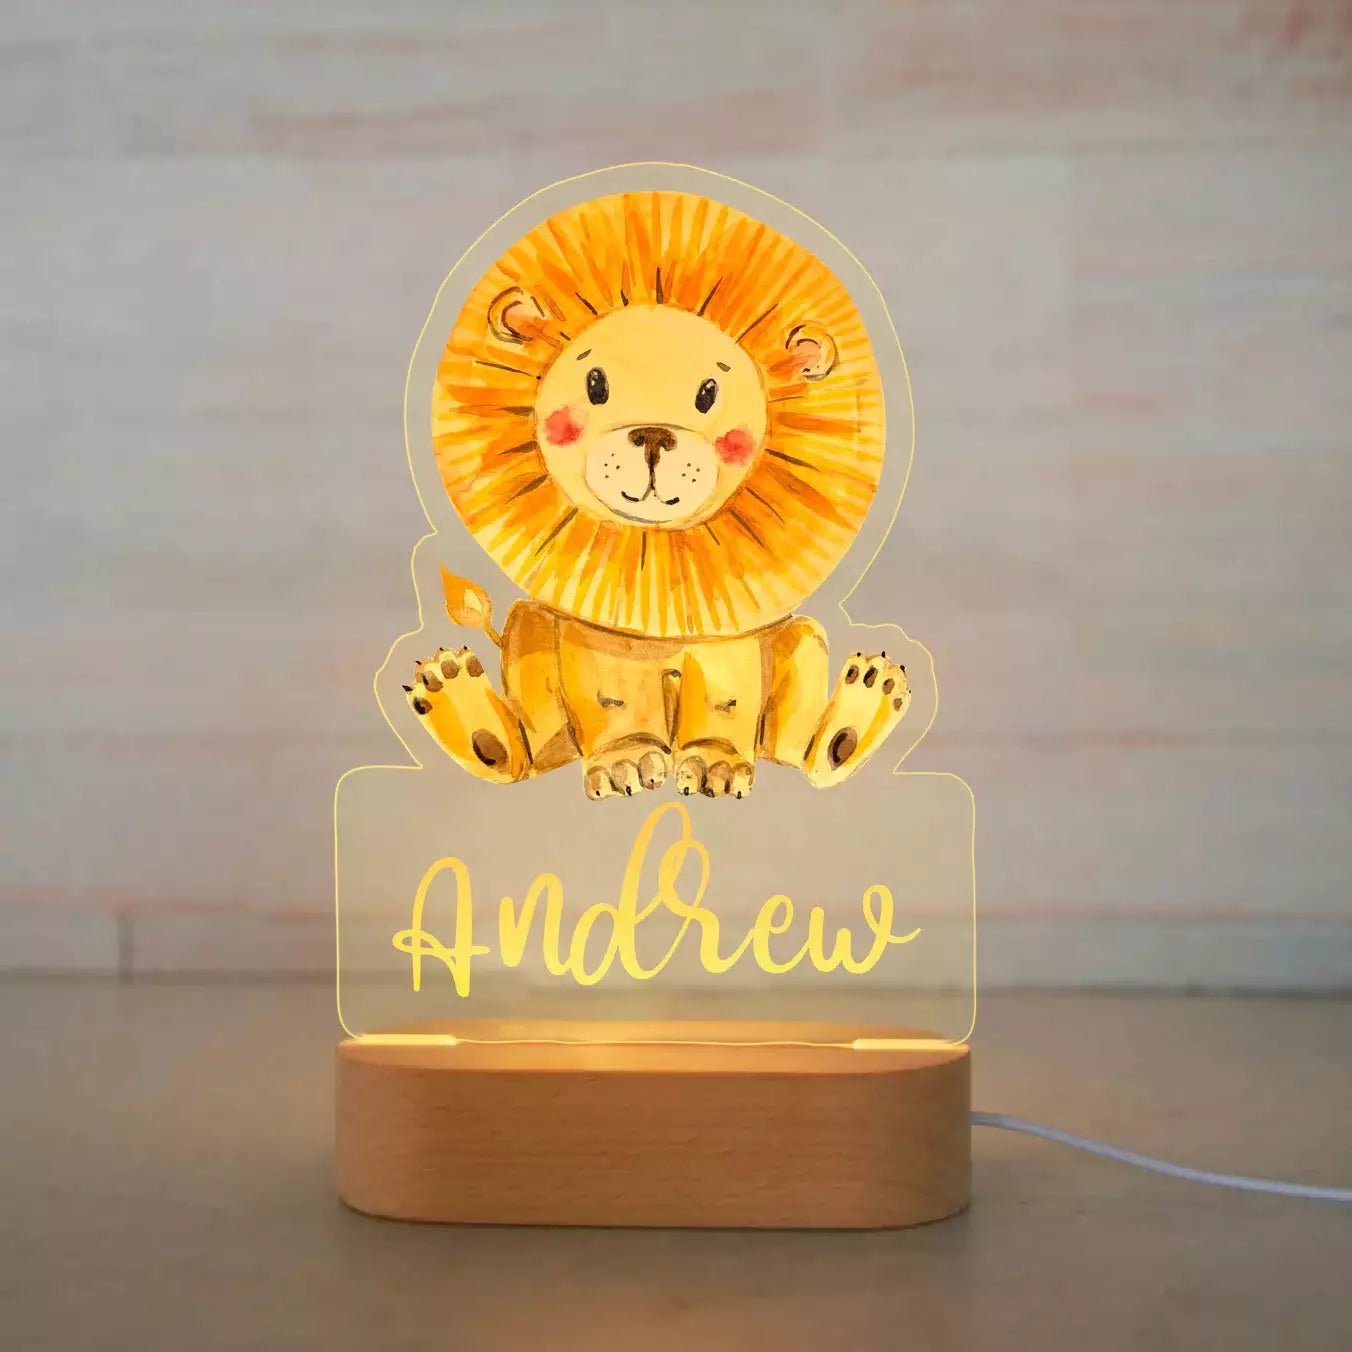 Customized Animal-themed Night Light for Kids - Personalized with Child's Name, Acrylic Lamp for Bedroom Decor Warm Light / 04Lion